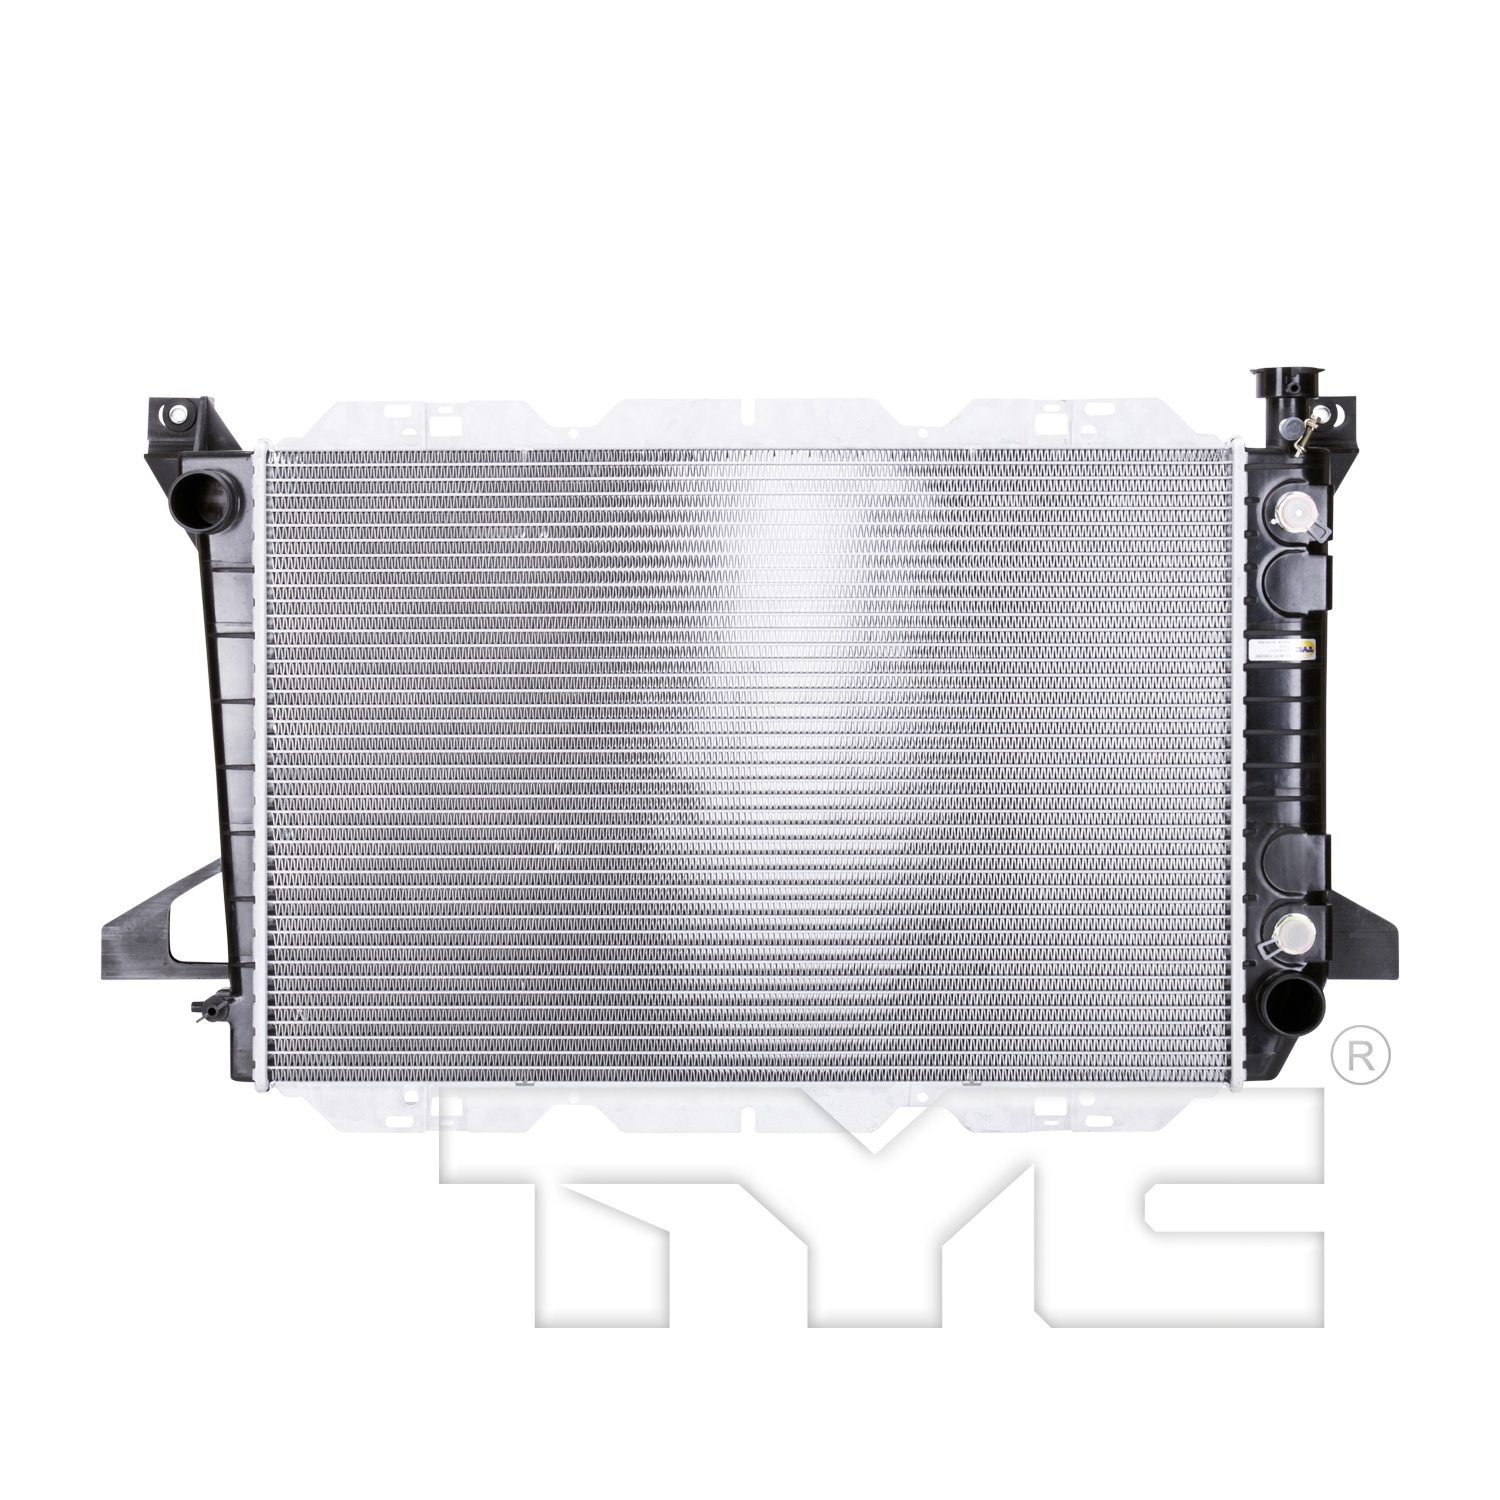 Aftermarket RADIATORS for FORD - F-150, F-150,87-96,Radiator assembly